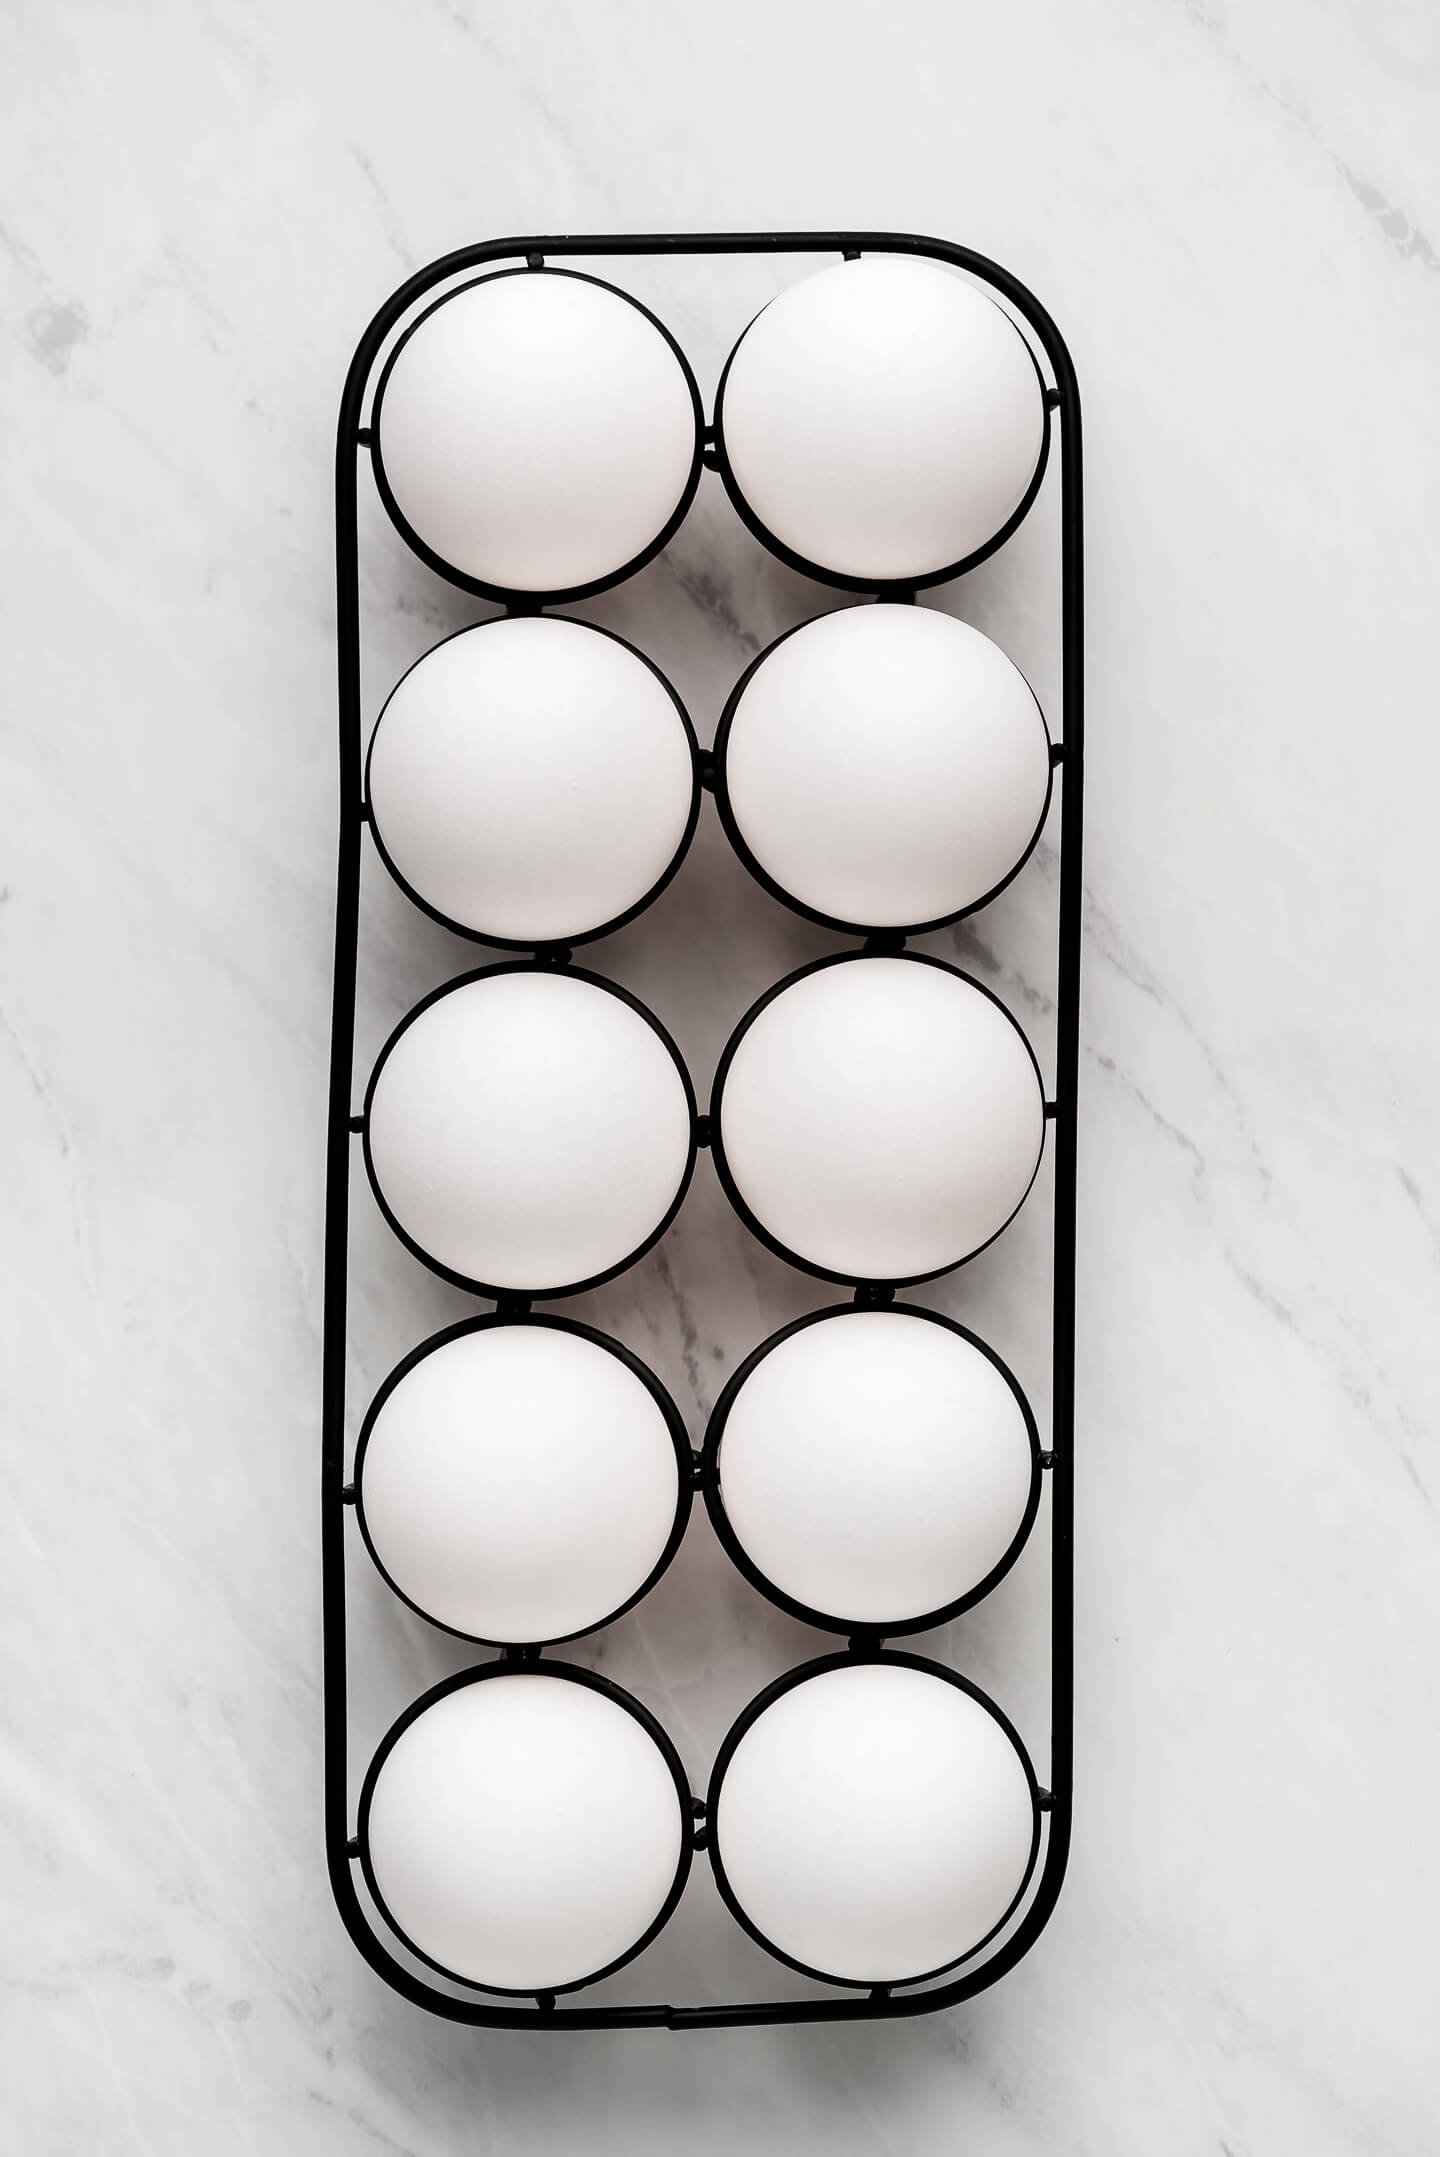 Eggs on a metal rack on a marble surface.